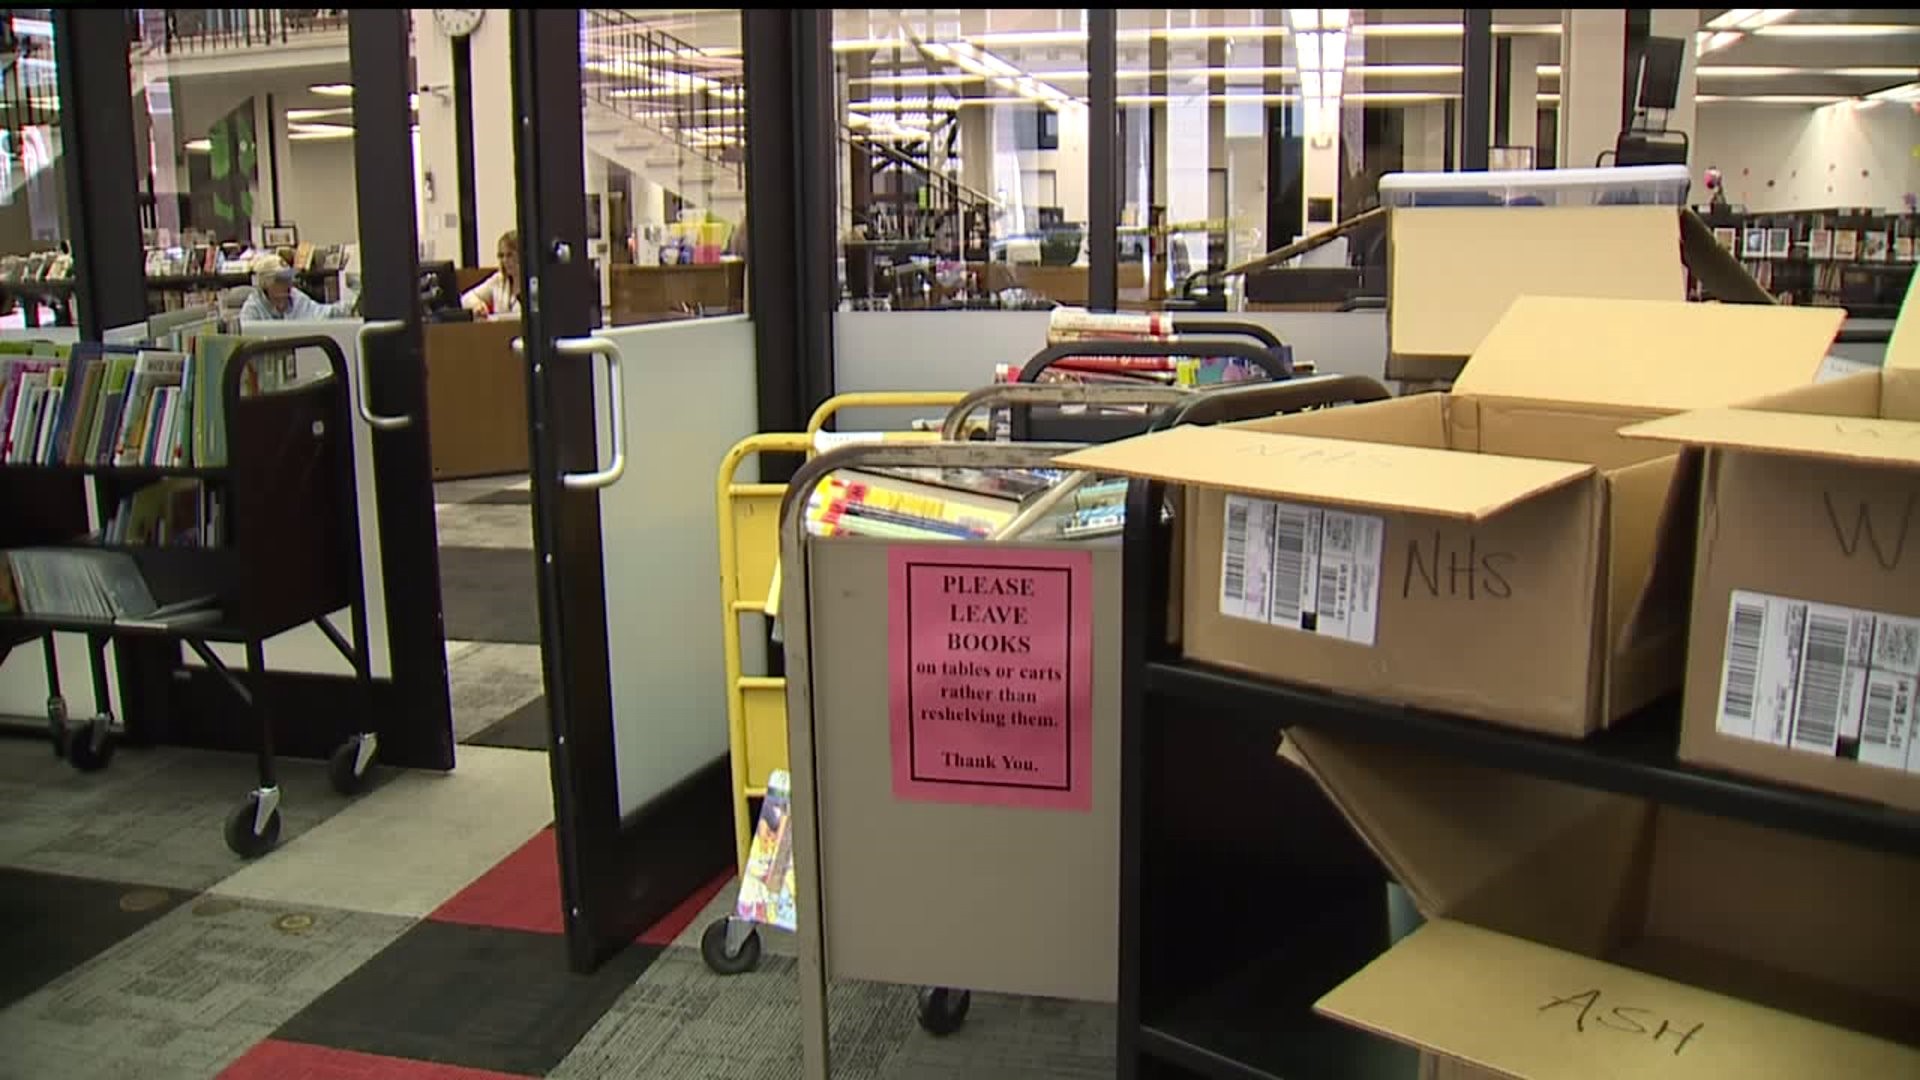 Davenport Library accepts food donations to pay off fines